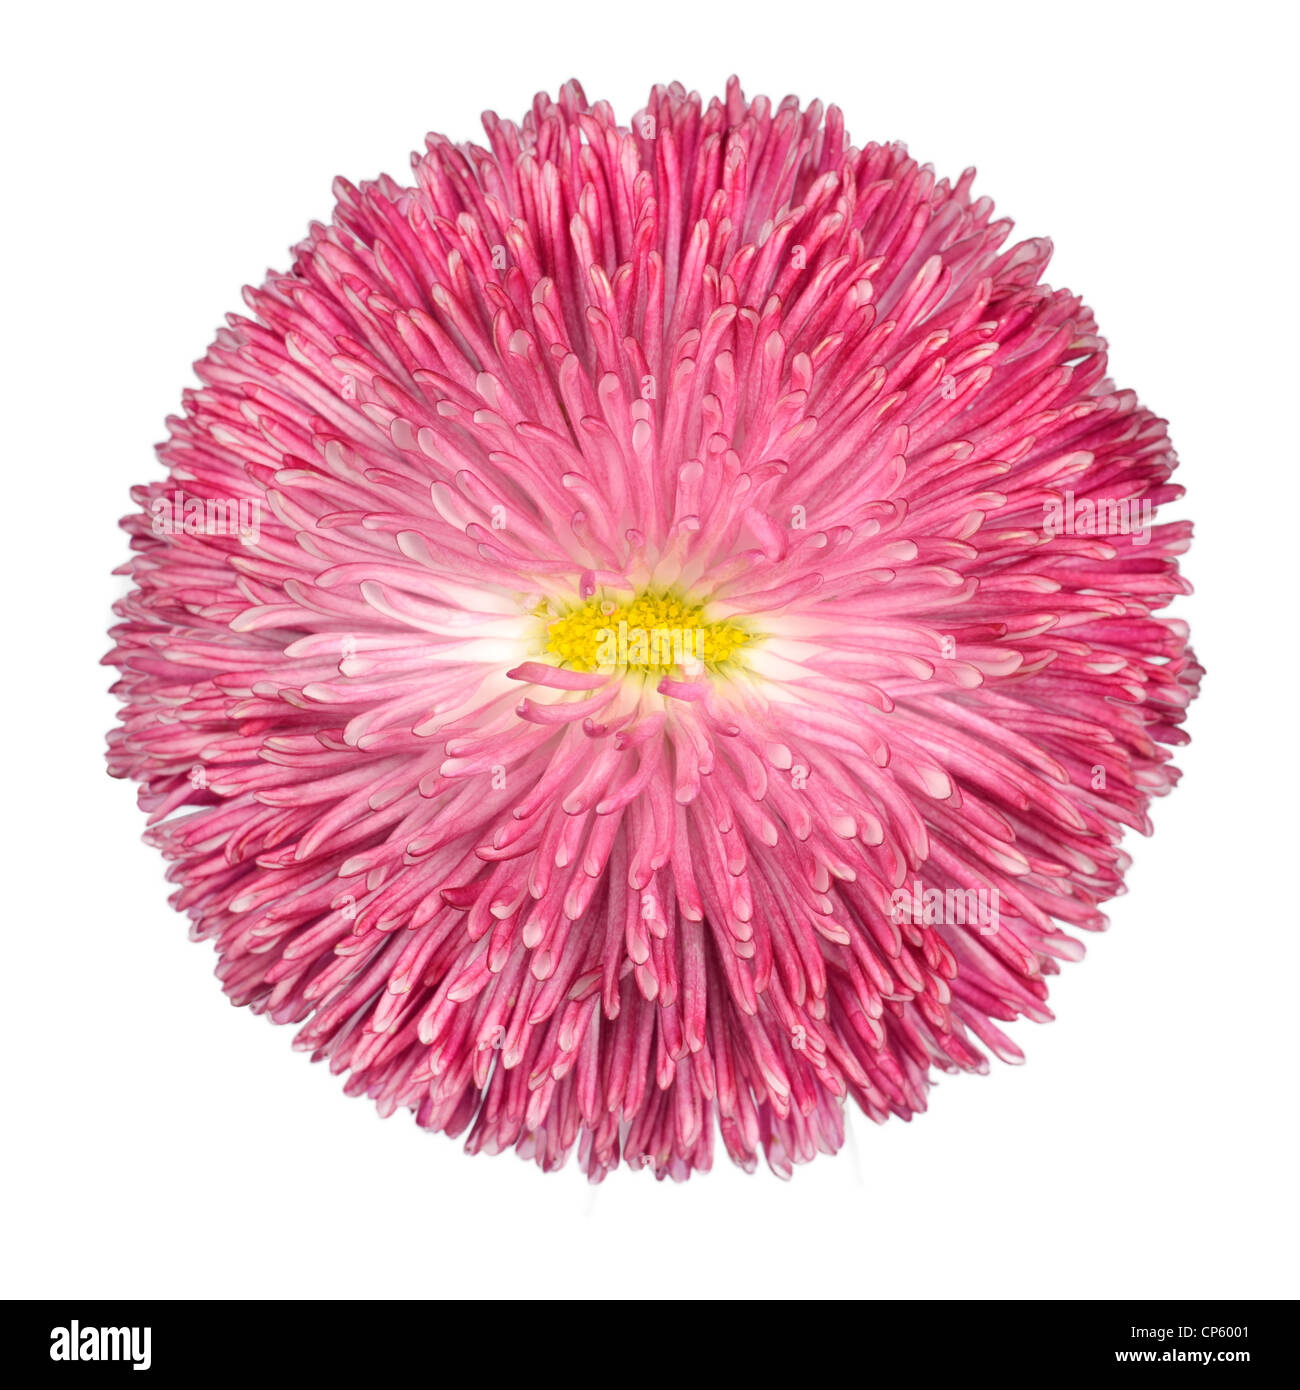 Pink Daisy Flower with Yellow Center Isolated on White Background. Bellis perennis - English Daisy - Asteraceae Macro Stock Photo